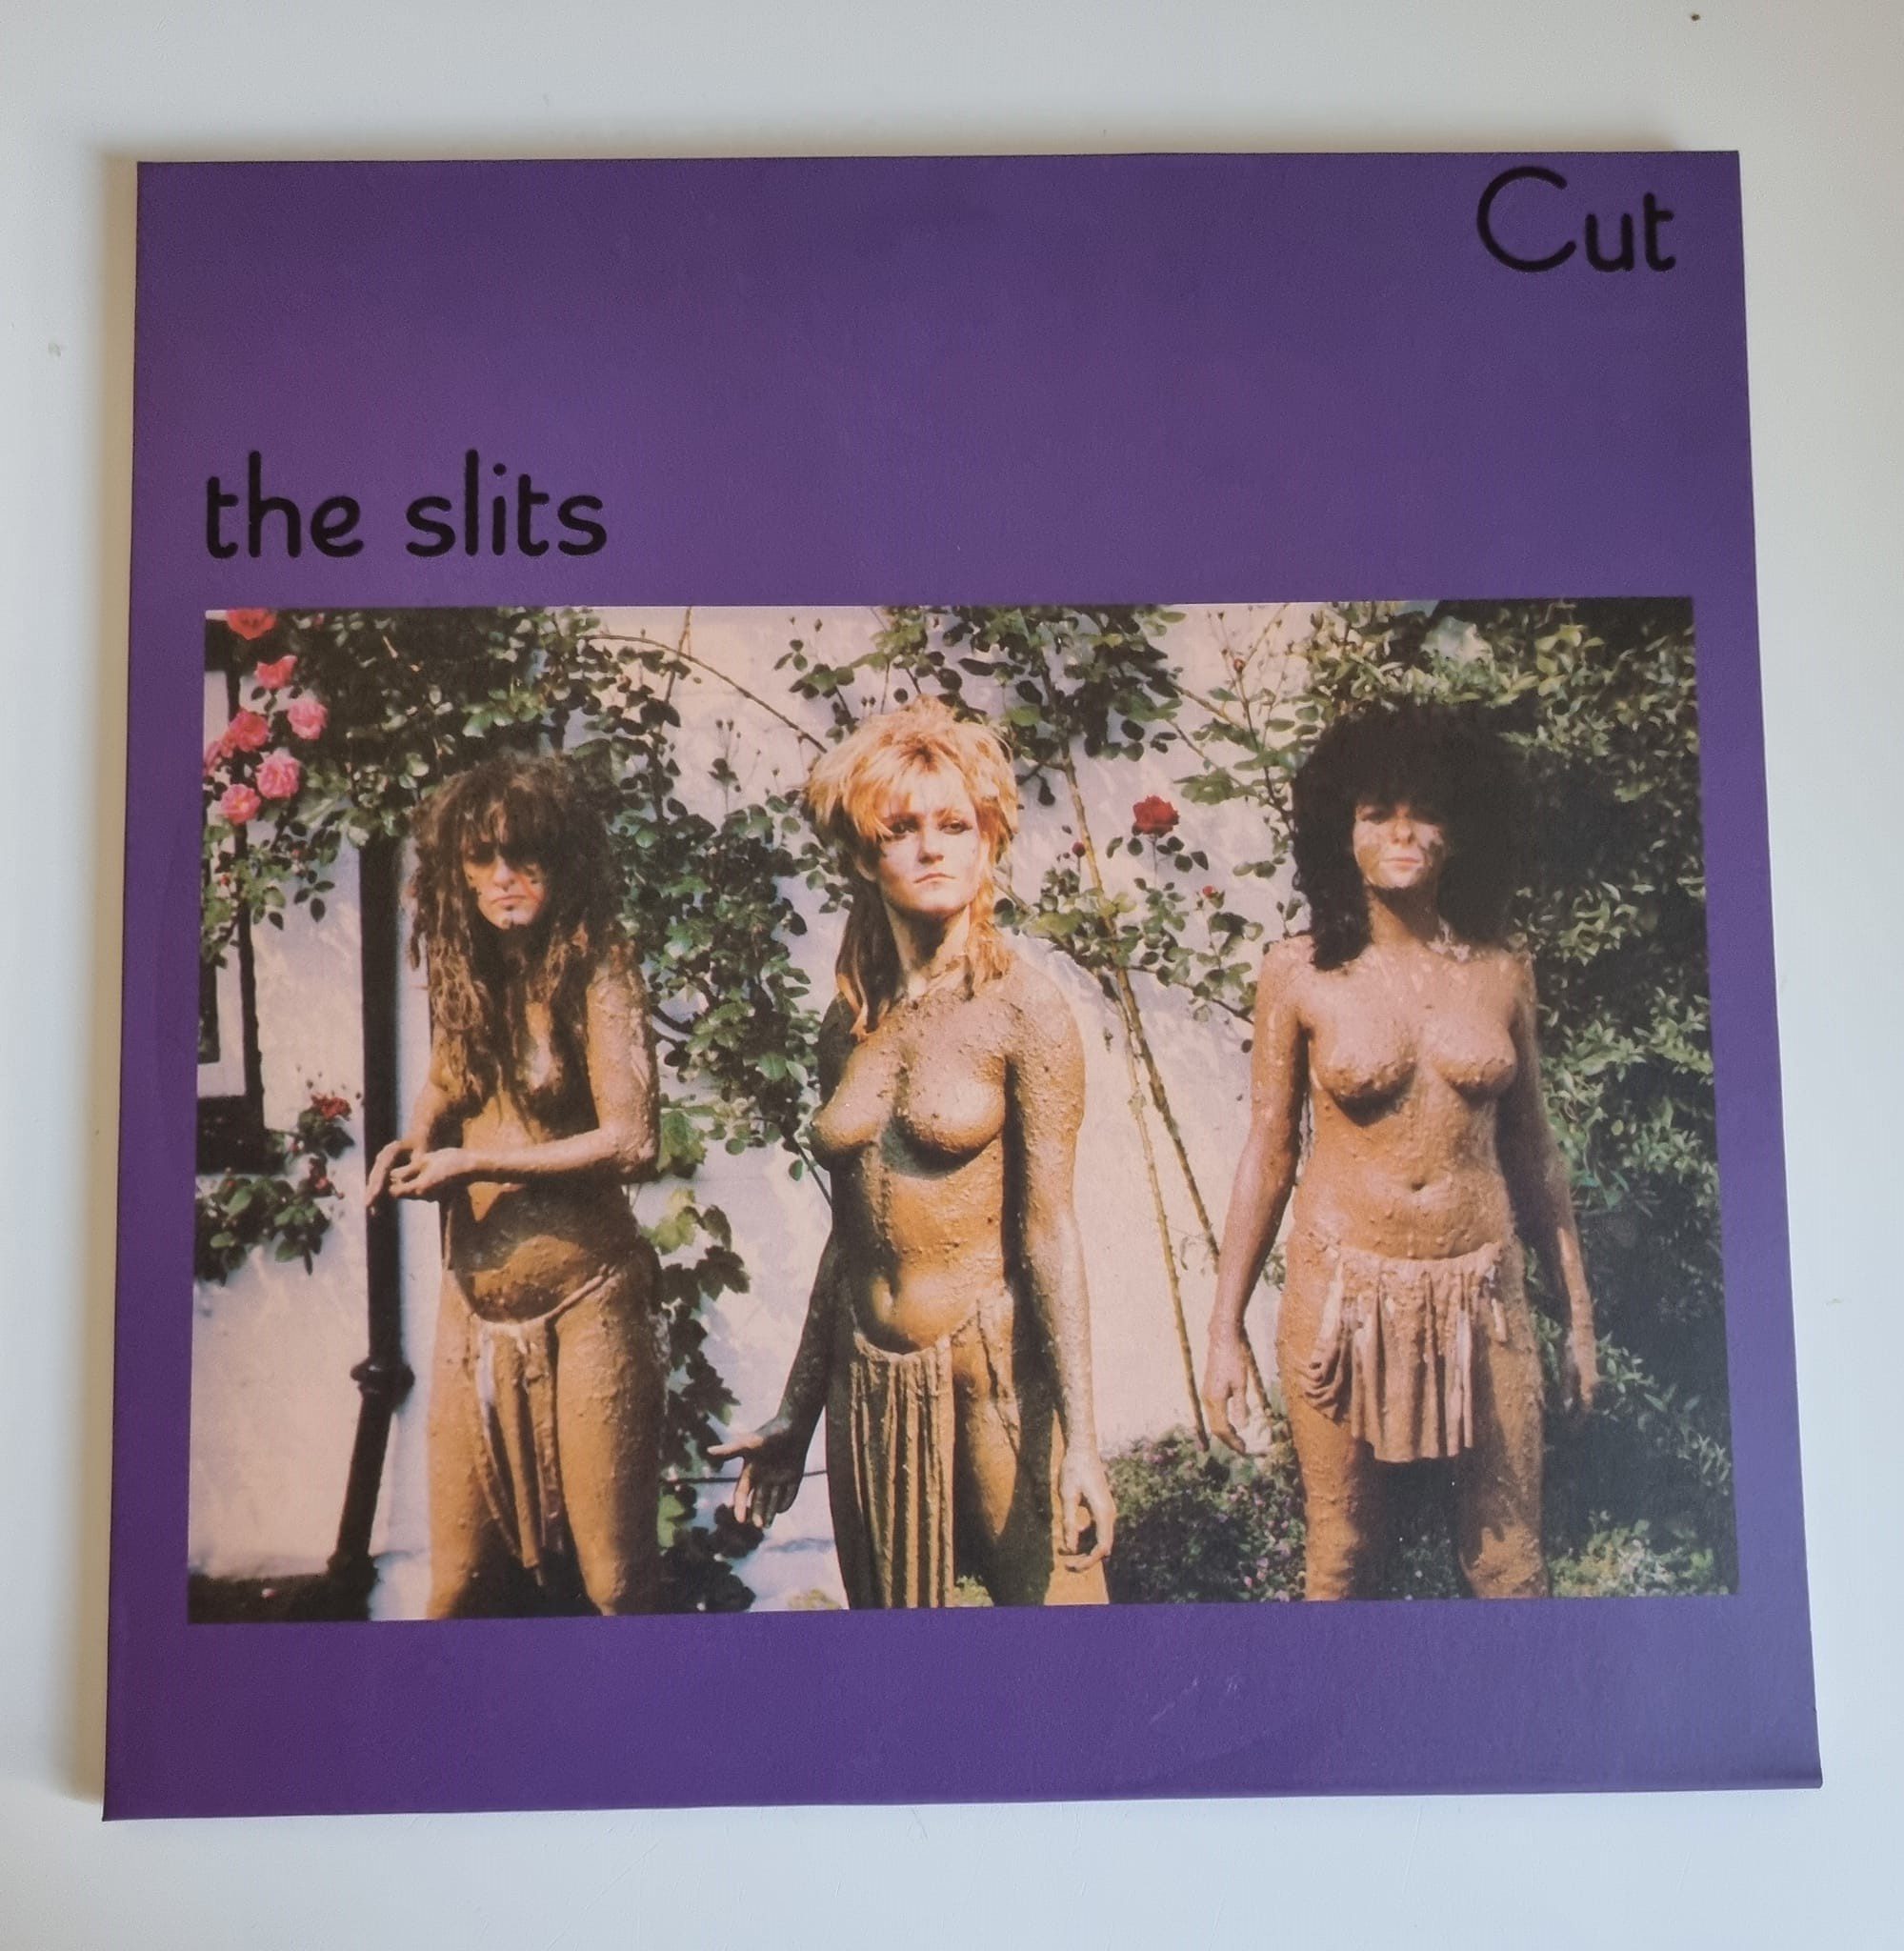 Buy this rare Slits record by clicking here